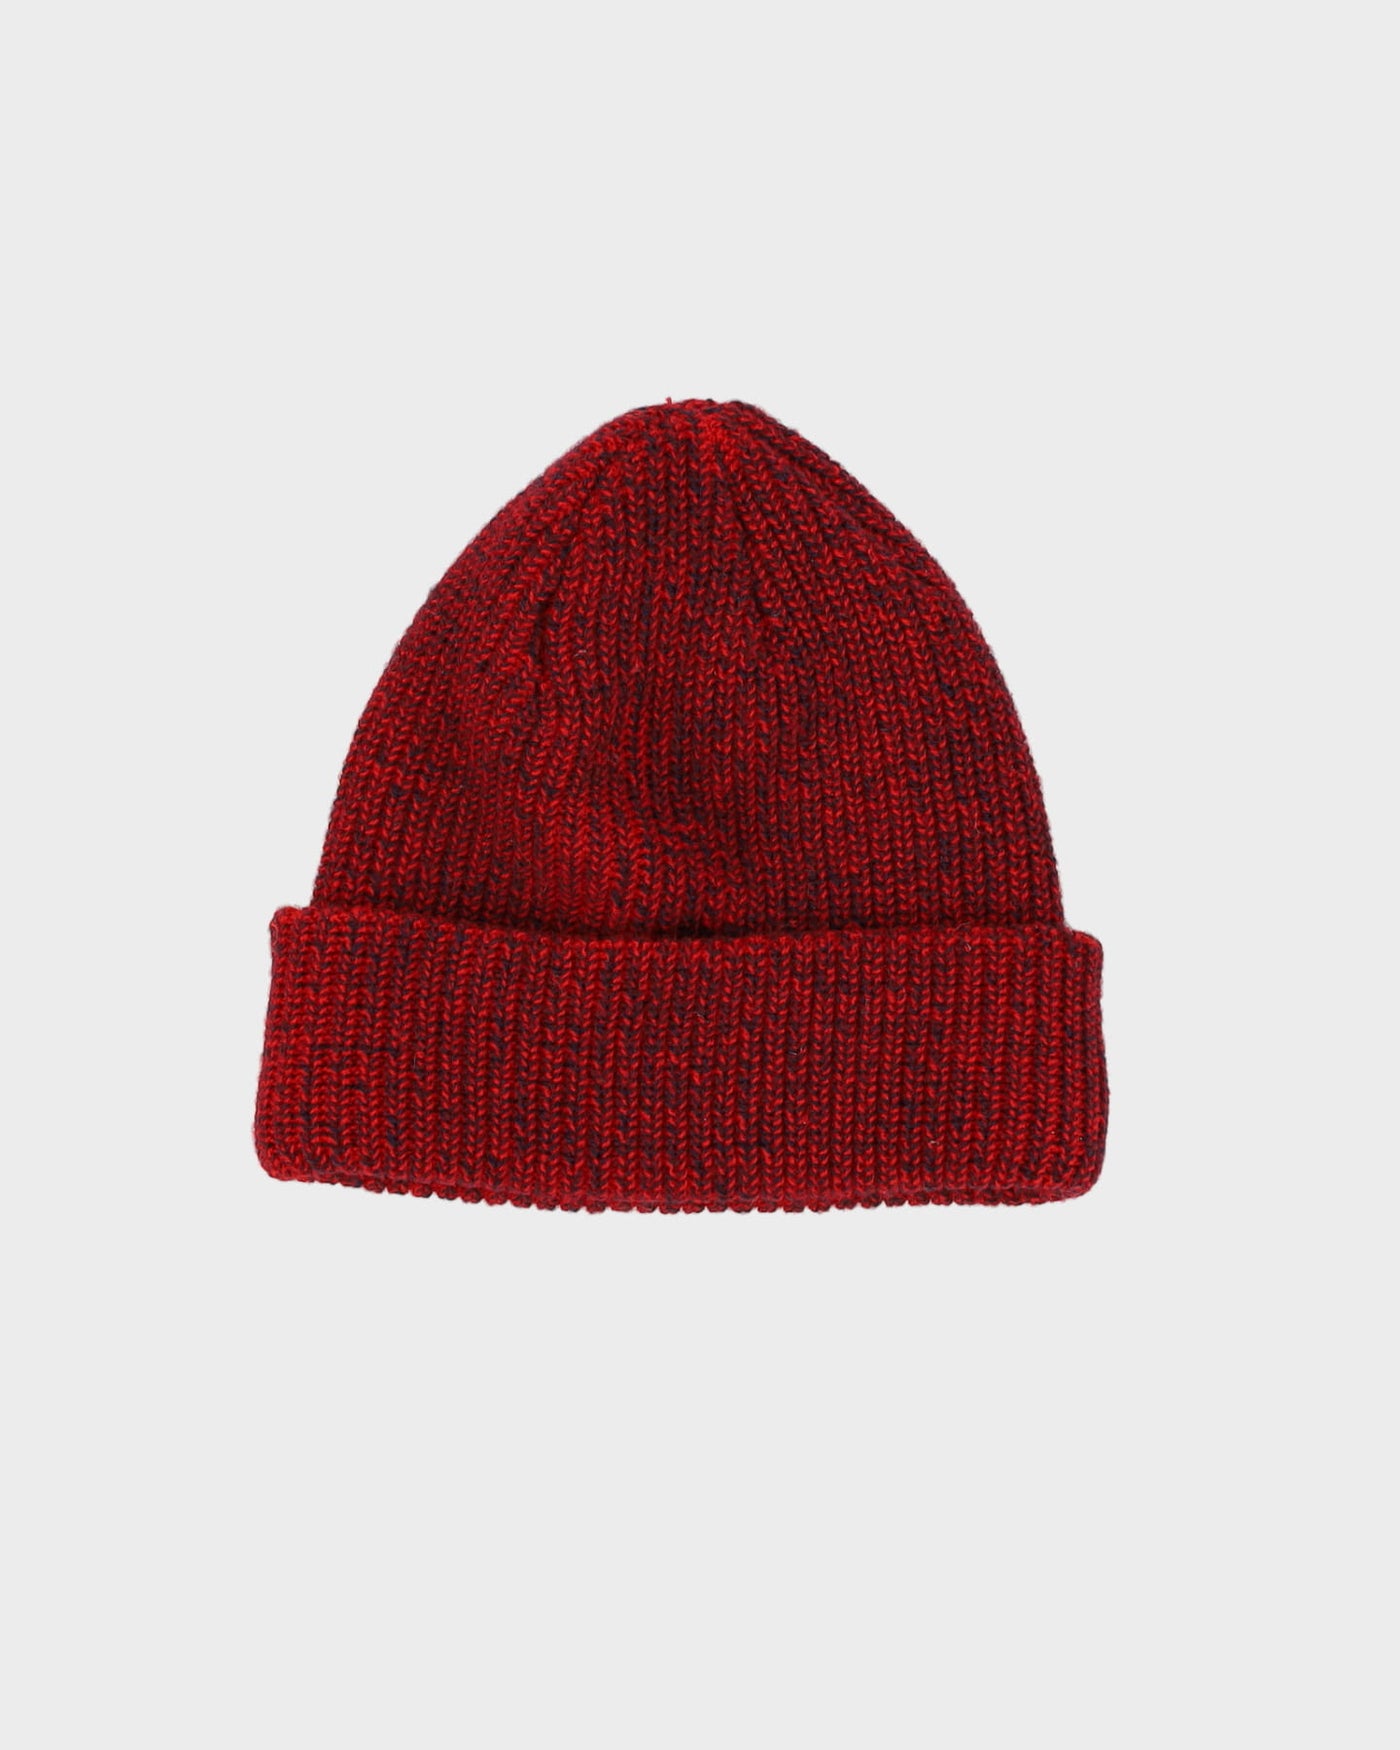 Converse Red Patterned Beanie